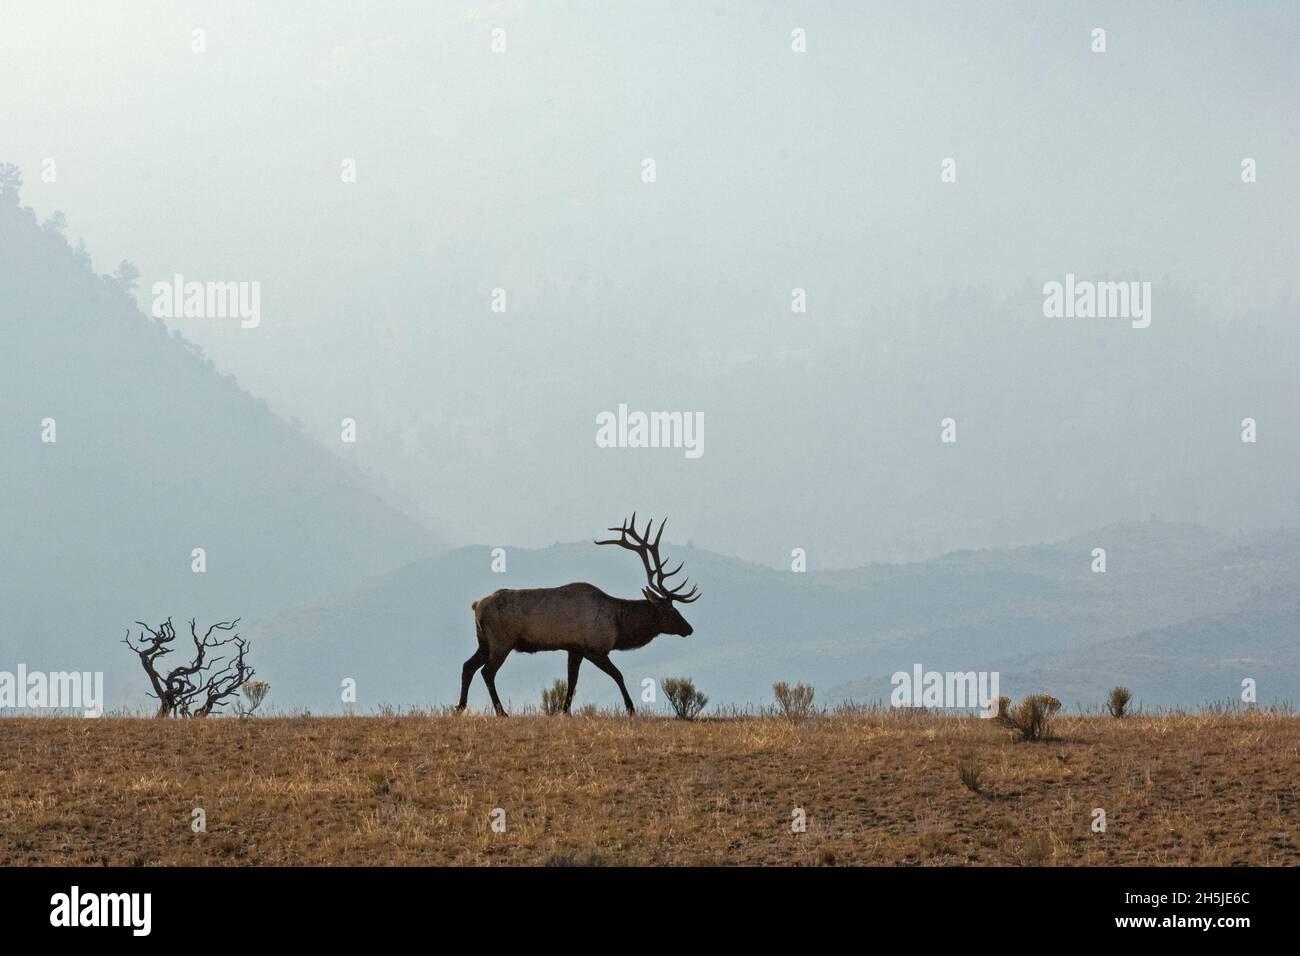 Bullenelch (Cervus canadensis). Yellowstone National Park, Wyoming, USA. Stockfoto